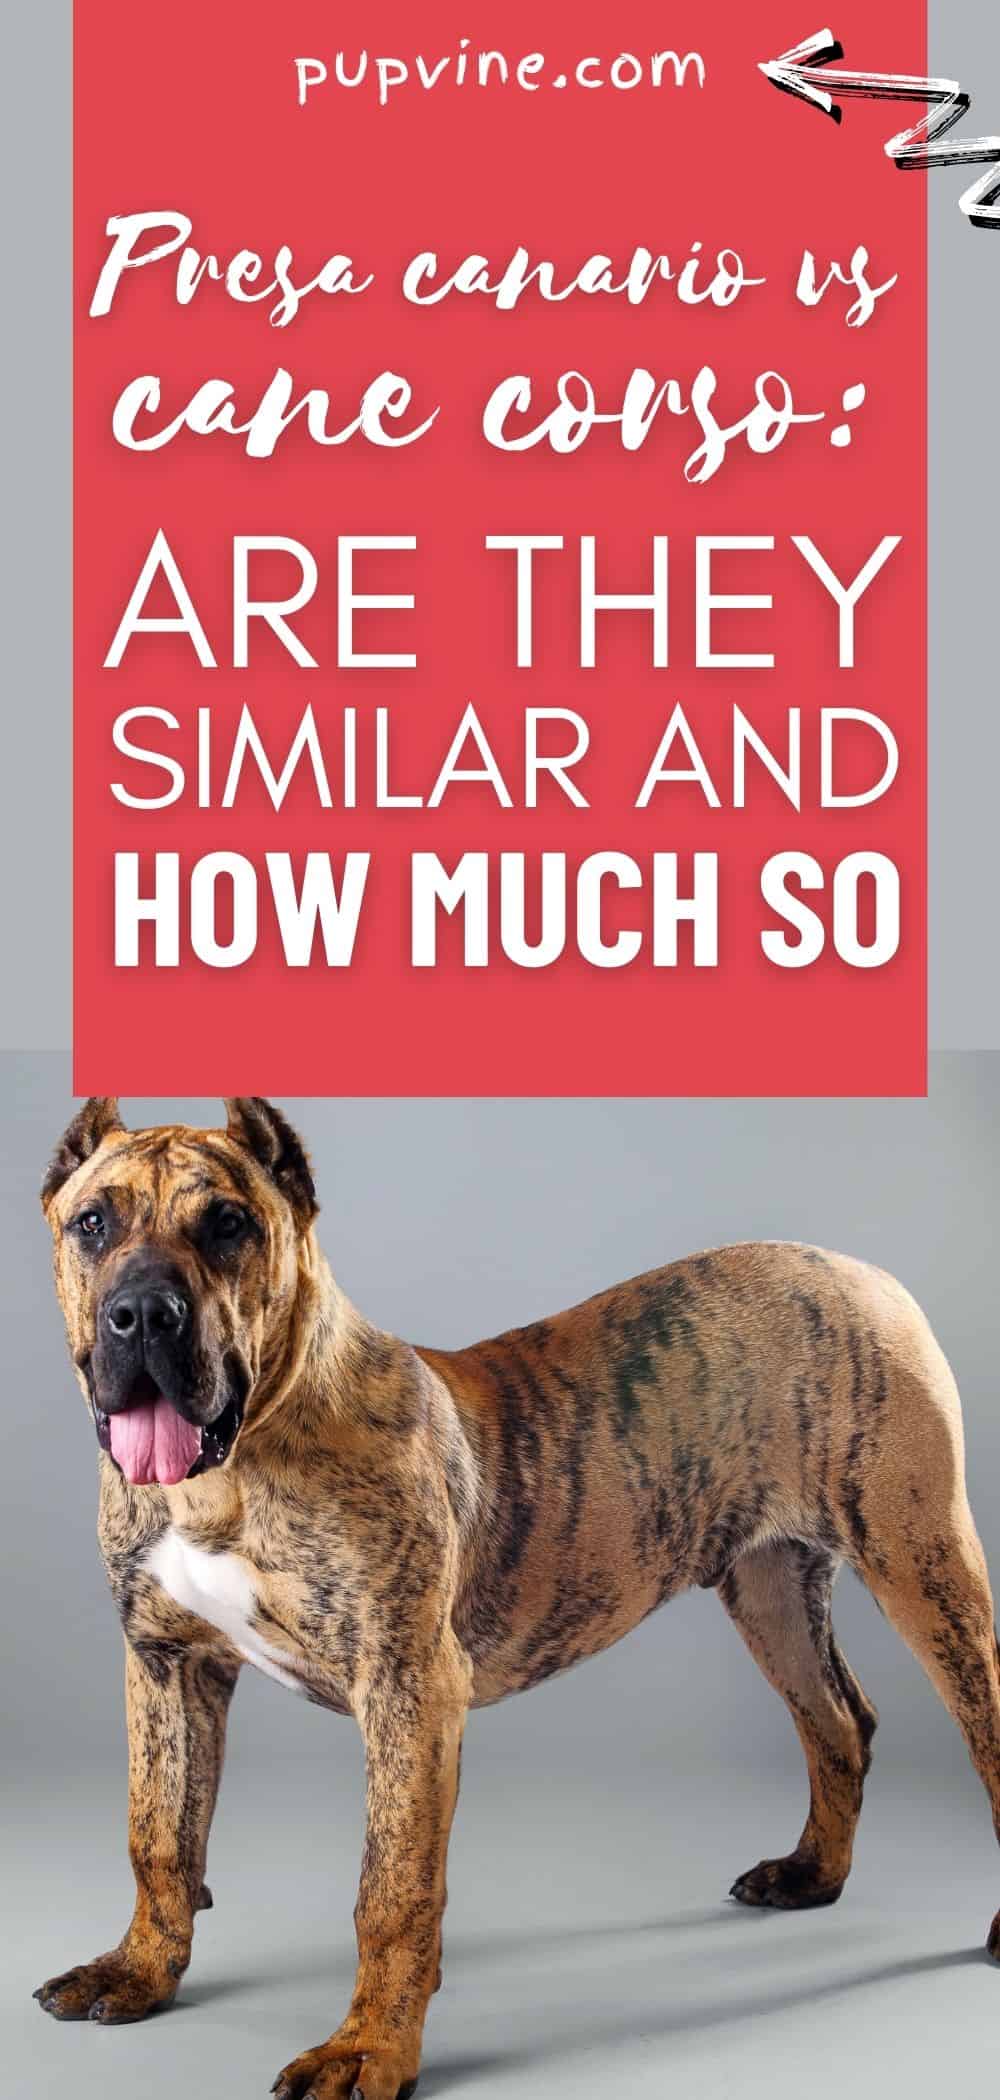 Presa Canario vs Cane Corso: Are They Similar and How Much So